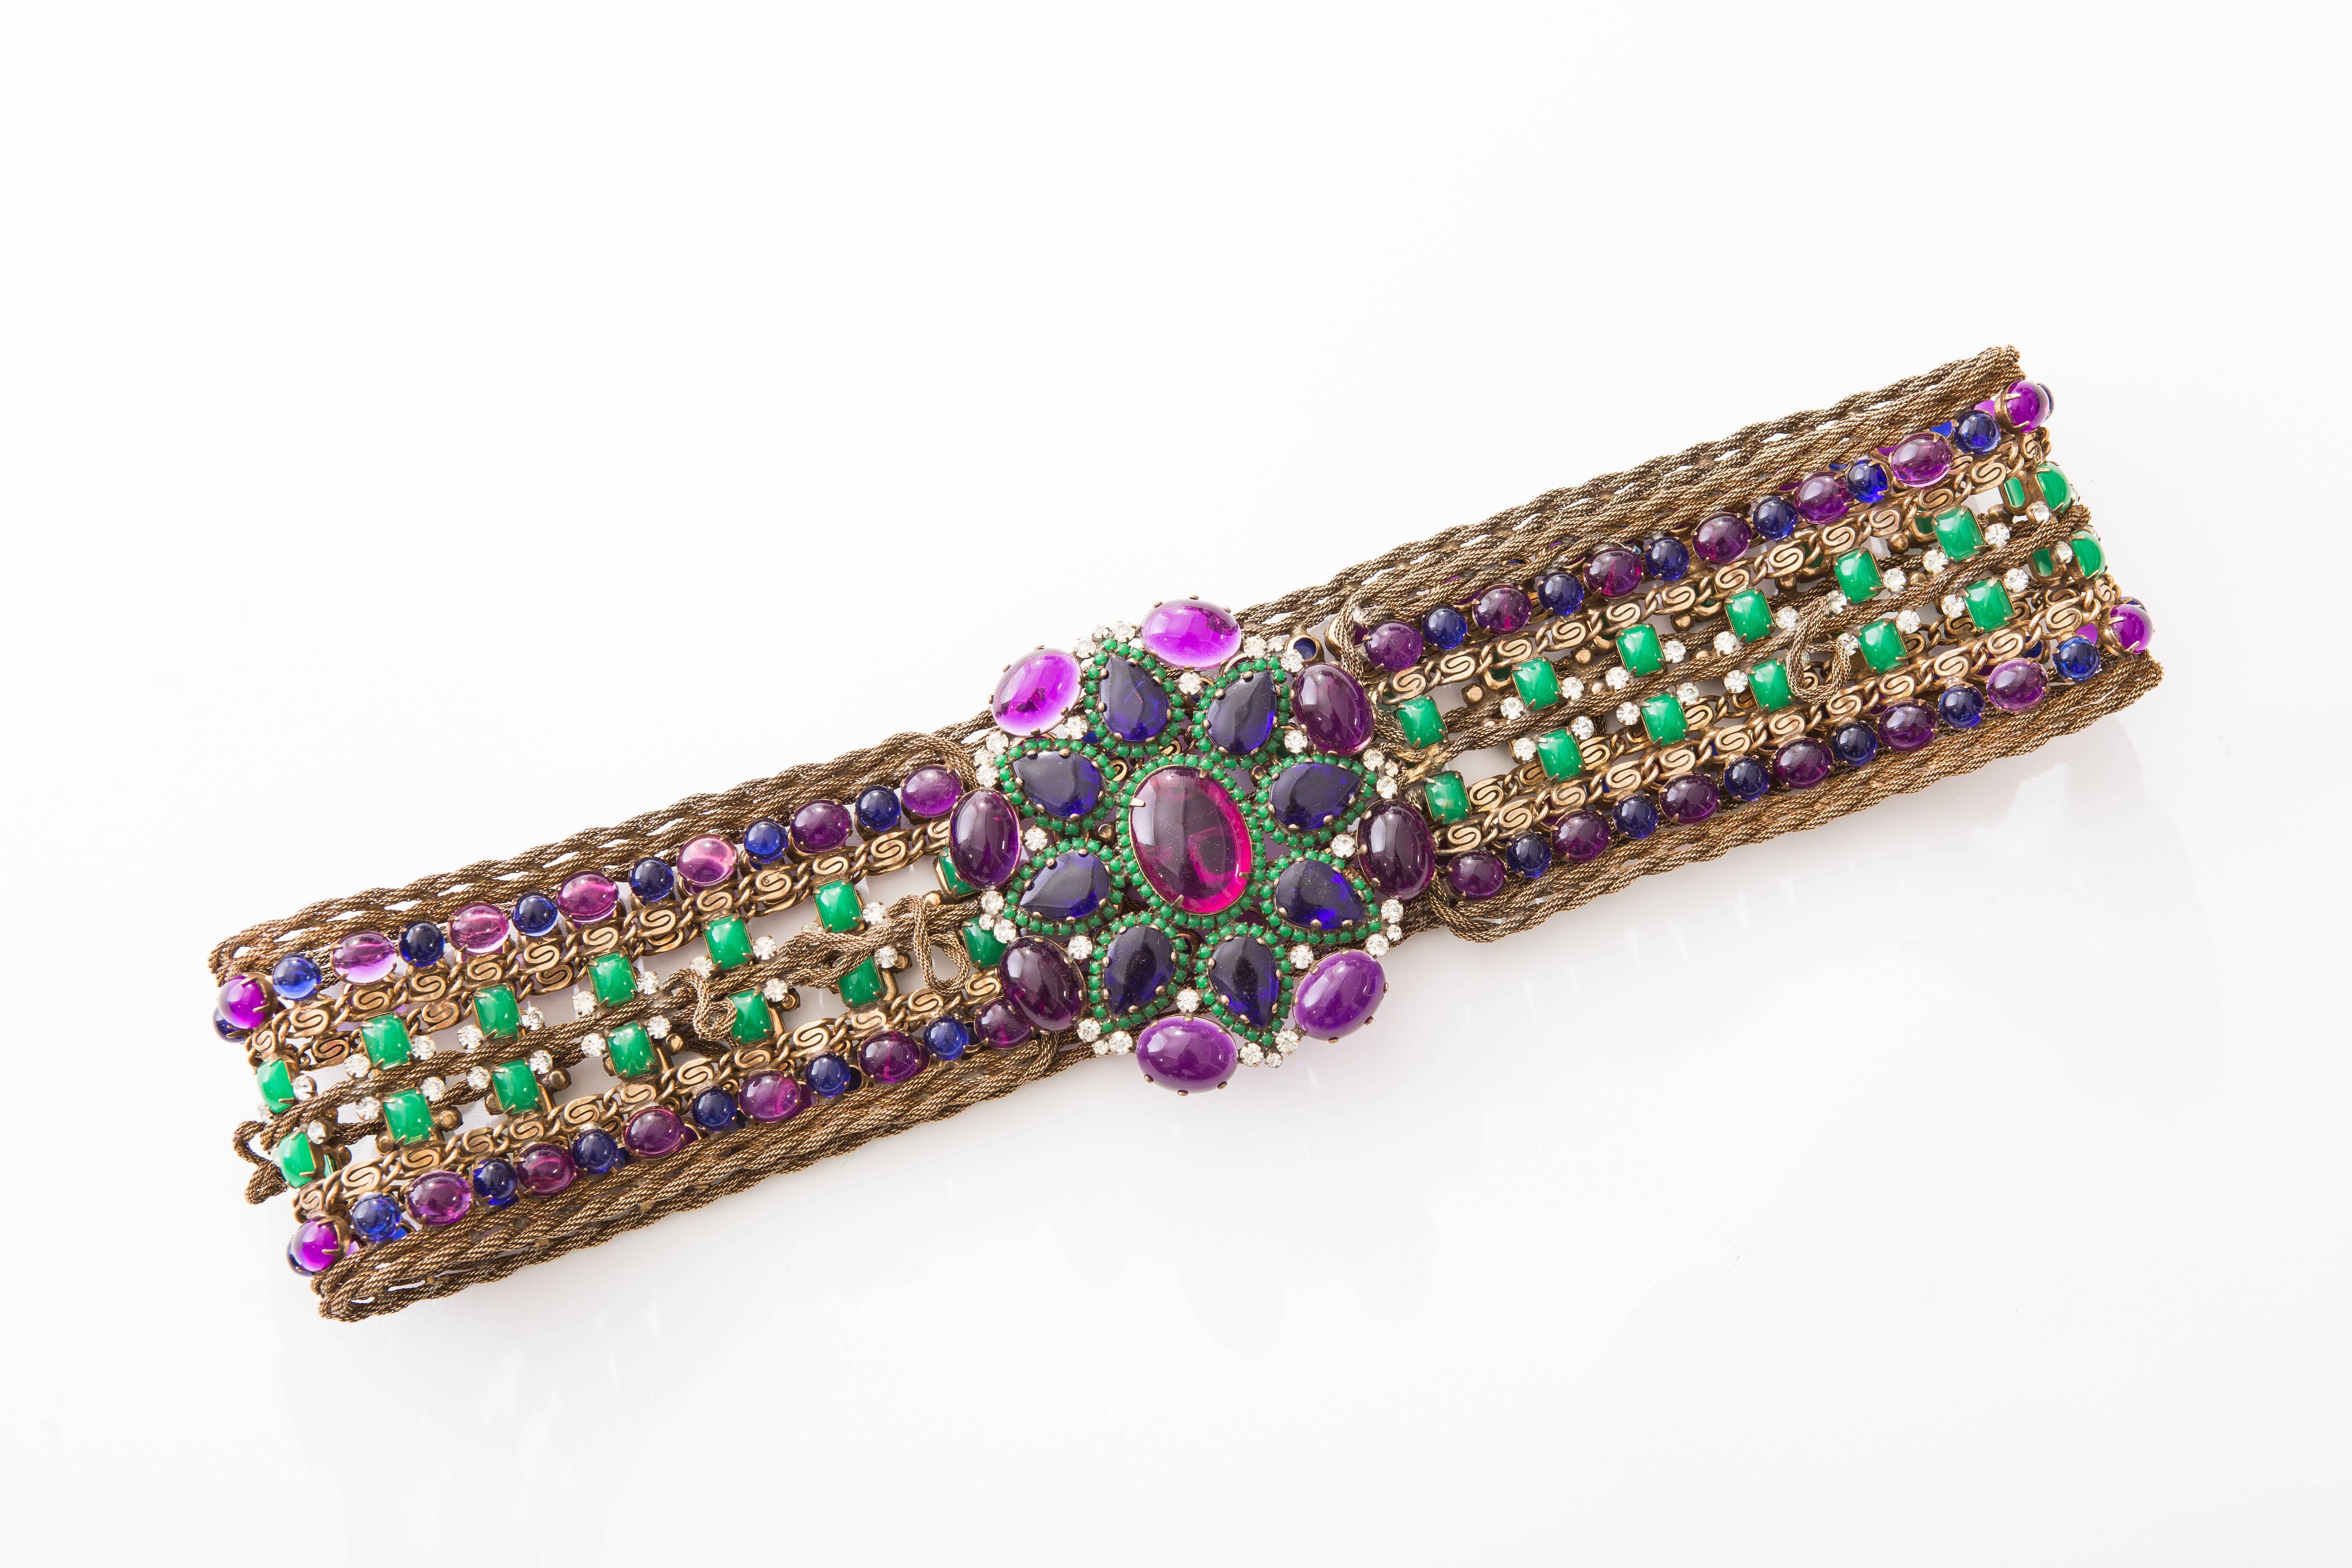 Kenneth Jay Lane, circa 1960's vintage jeweled belt made of antiqued brass chain with glass cabachons, swarovski crystals and stamped K.J.L.

3.0